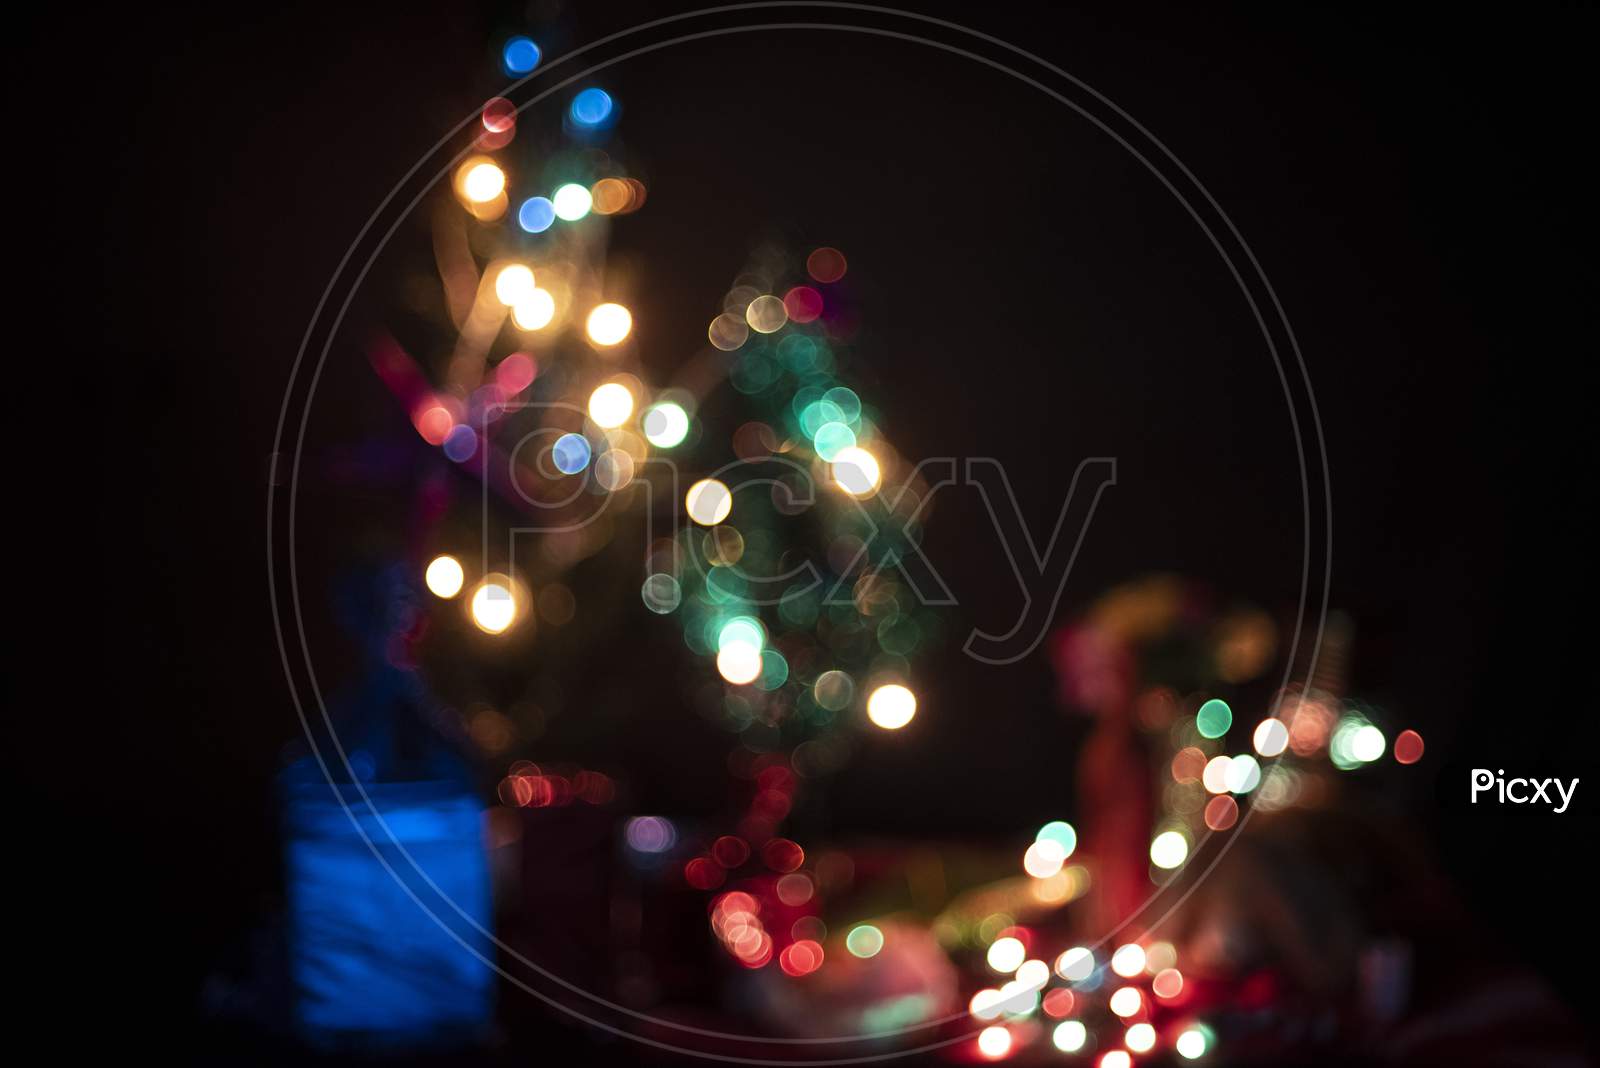 Blurred image of a decoration with Christmas trees, lights, gifts,toys, Santa Clause, candles for the celebration of Christmas and new year. Indian lifestyle and Christmas celebration.